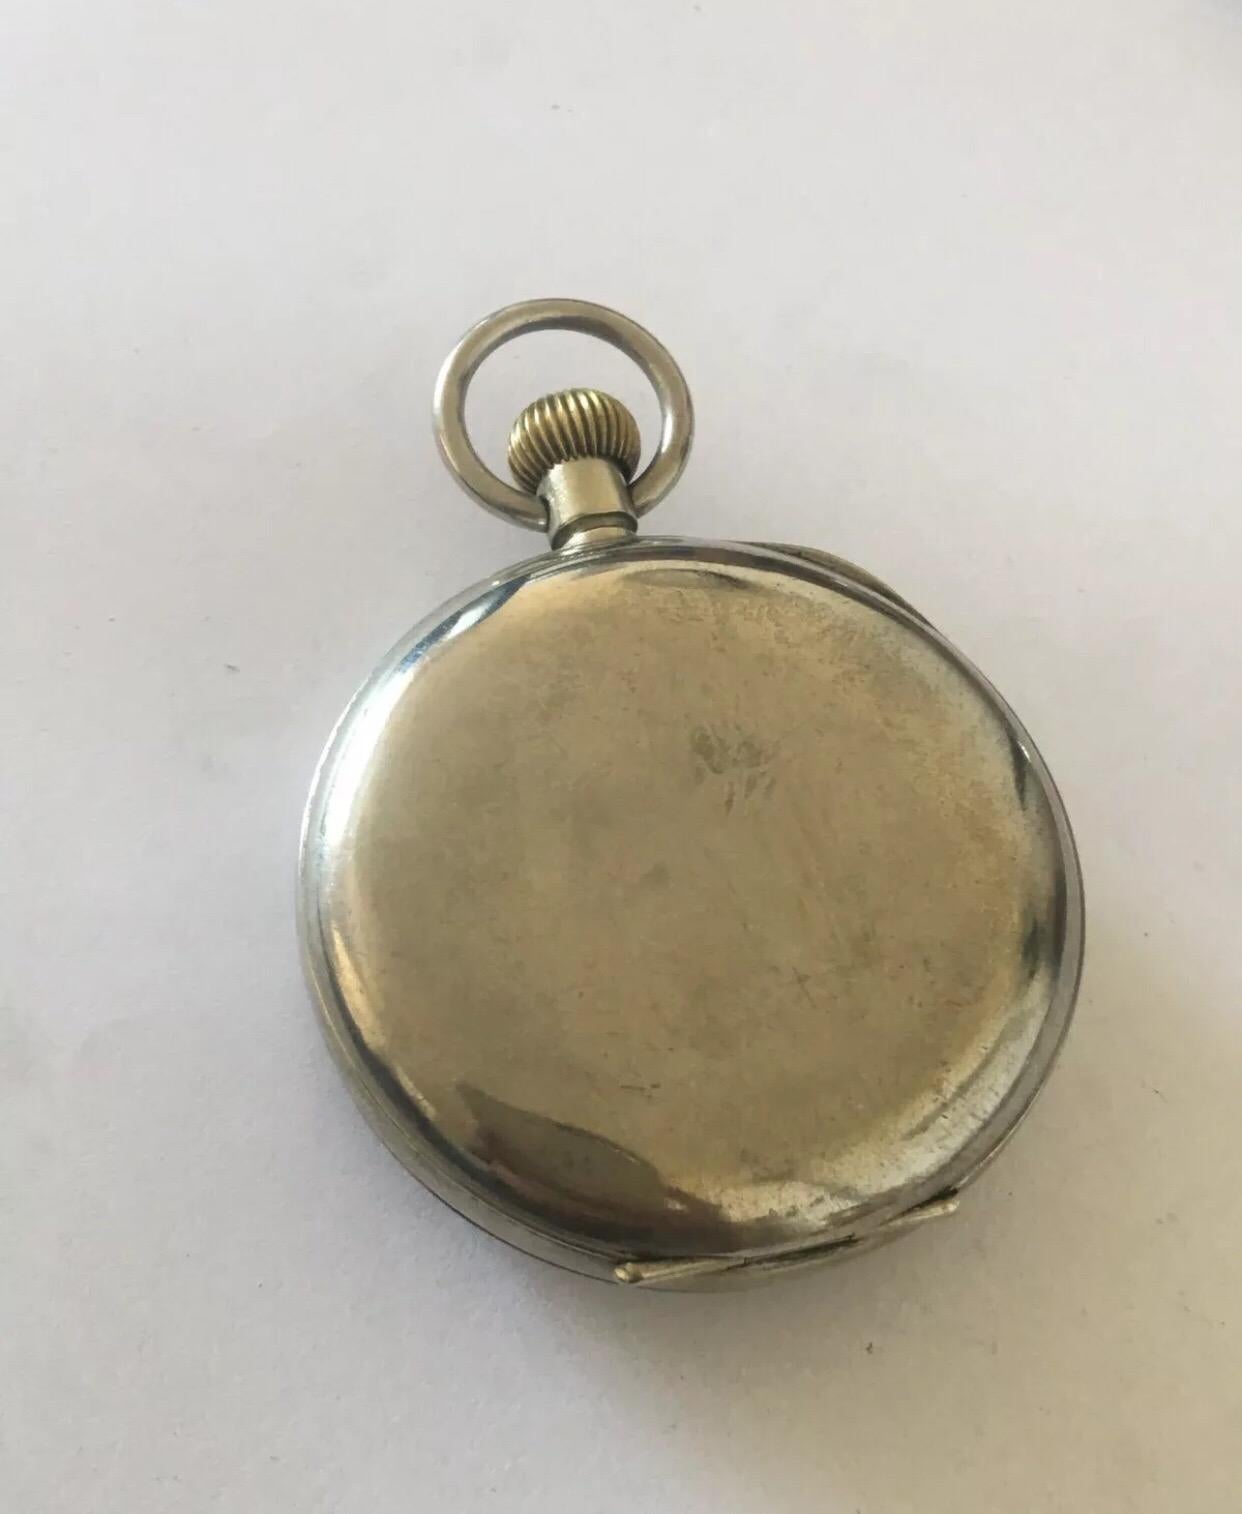 This 8 day Goliath pocket watch is in good working order.